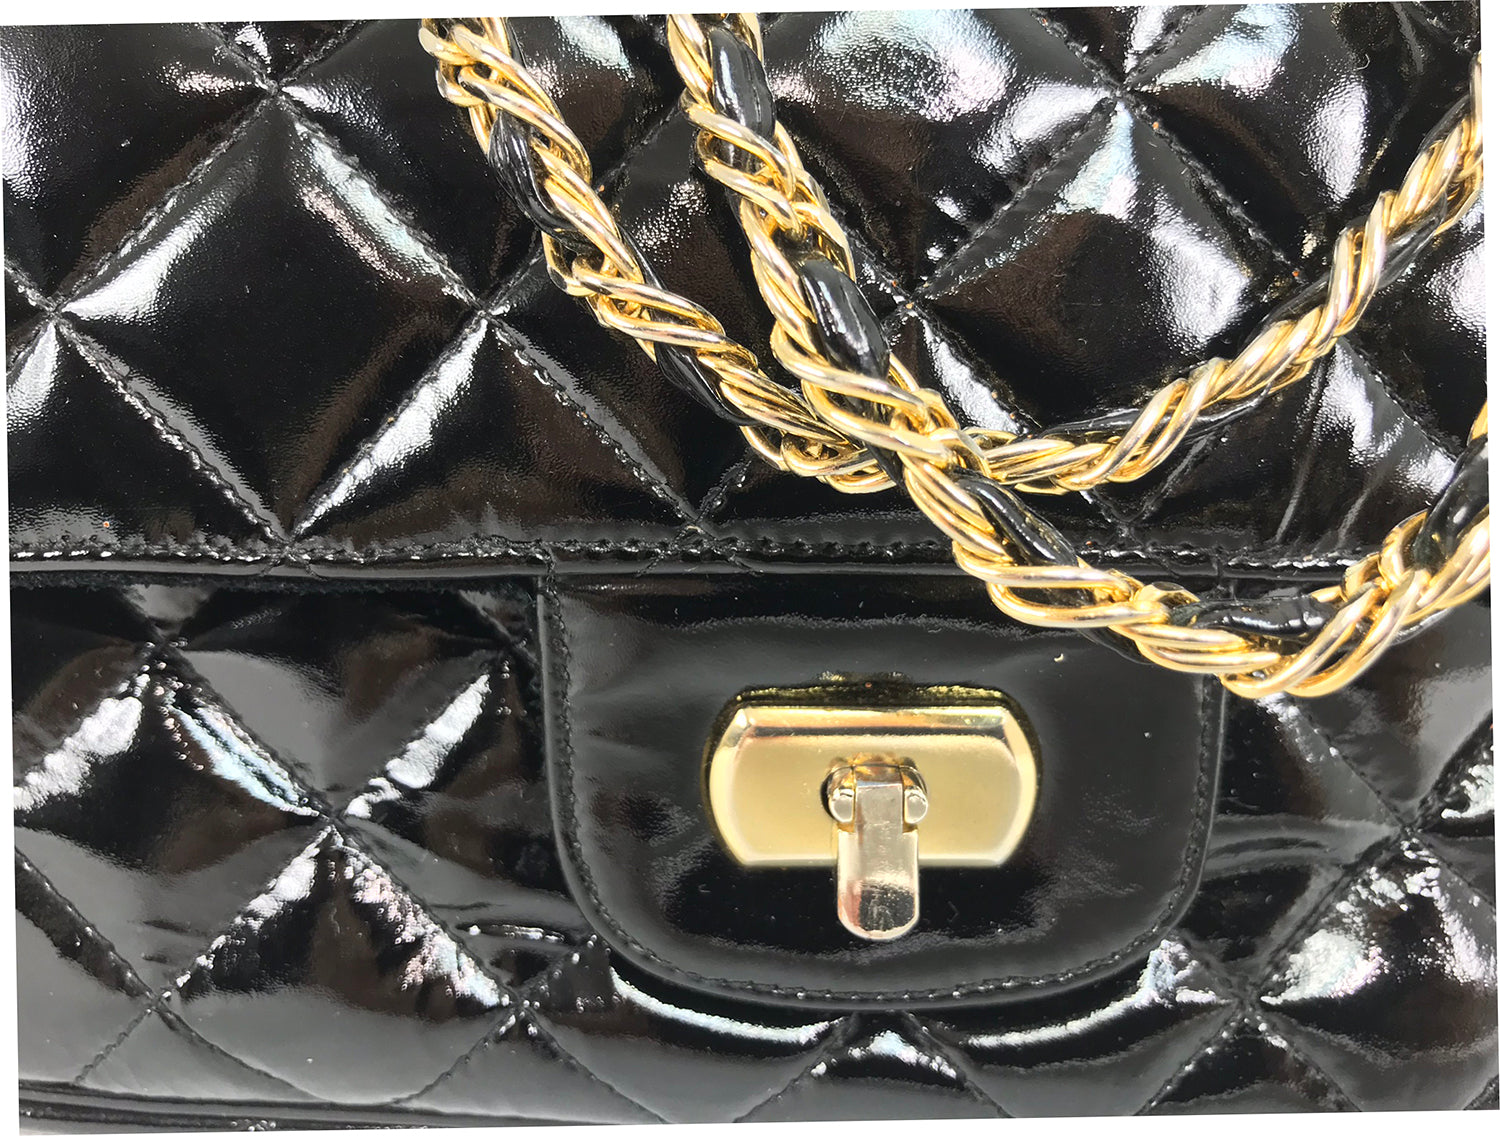 Vintage Jay Herbert Quilted Flap Black Patent Leather Chain